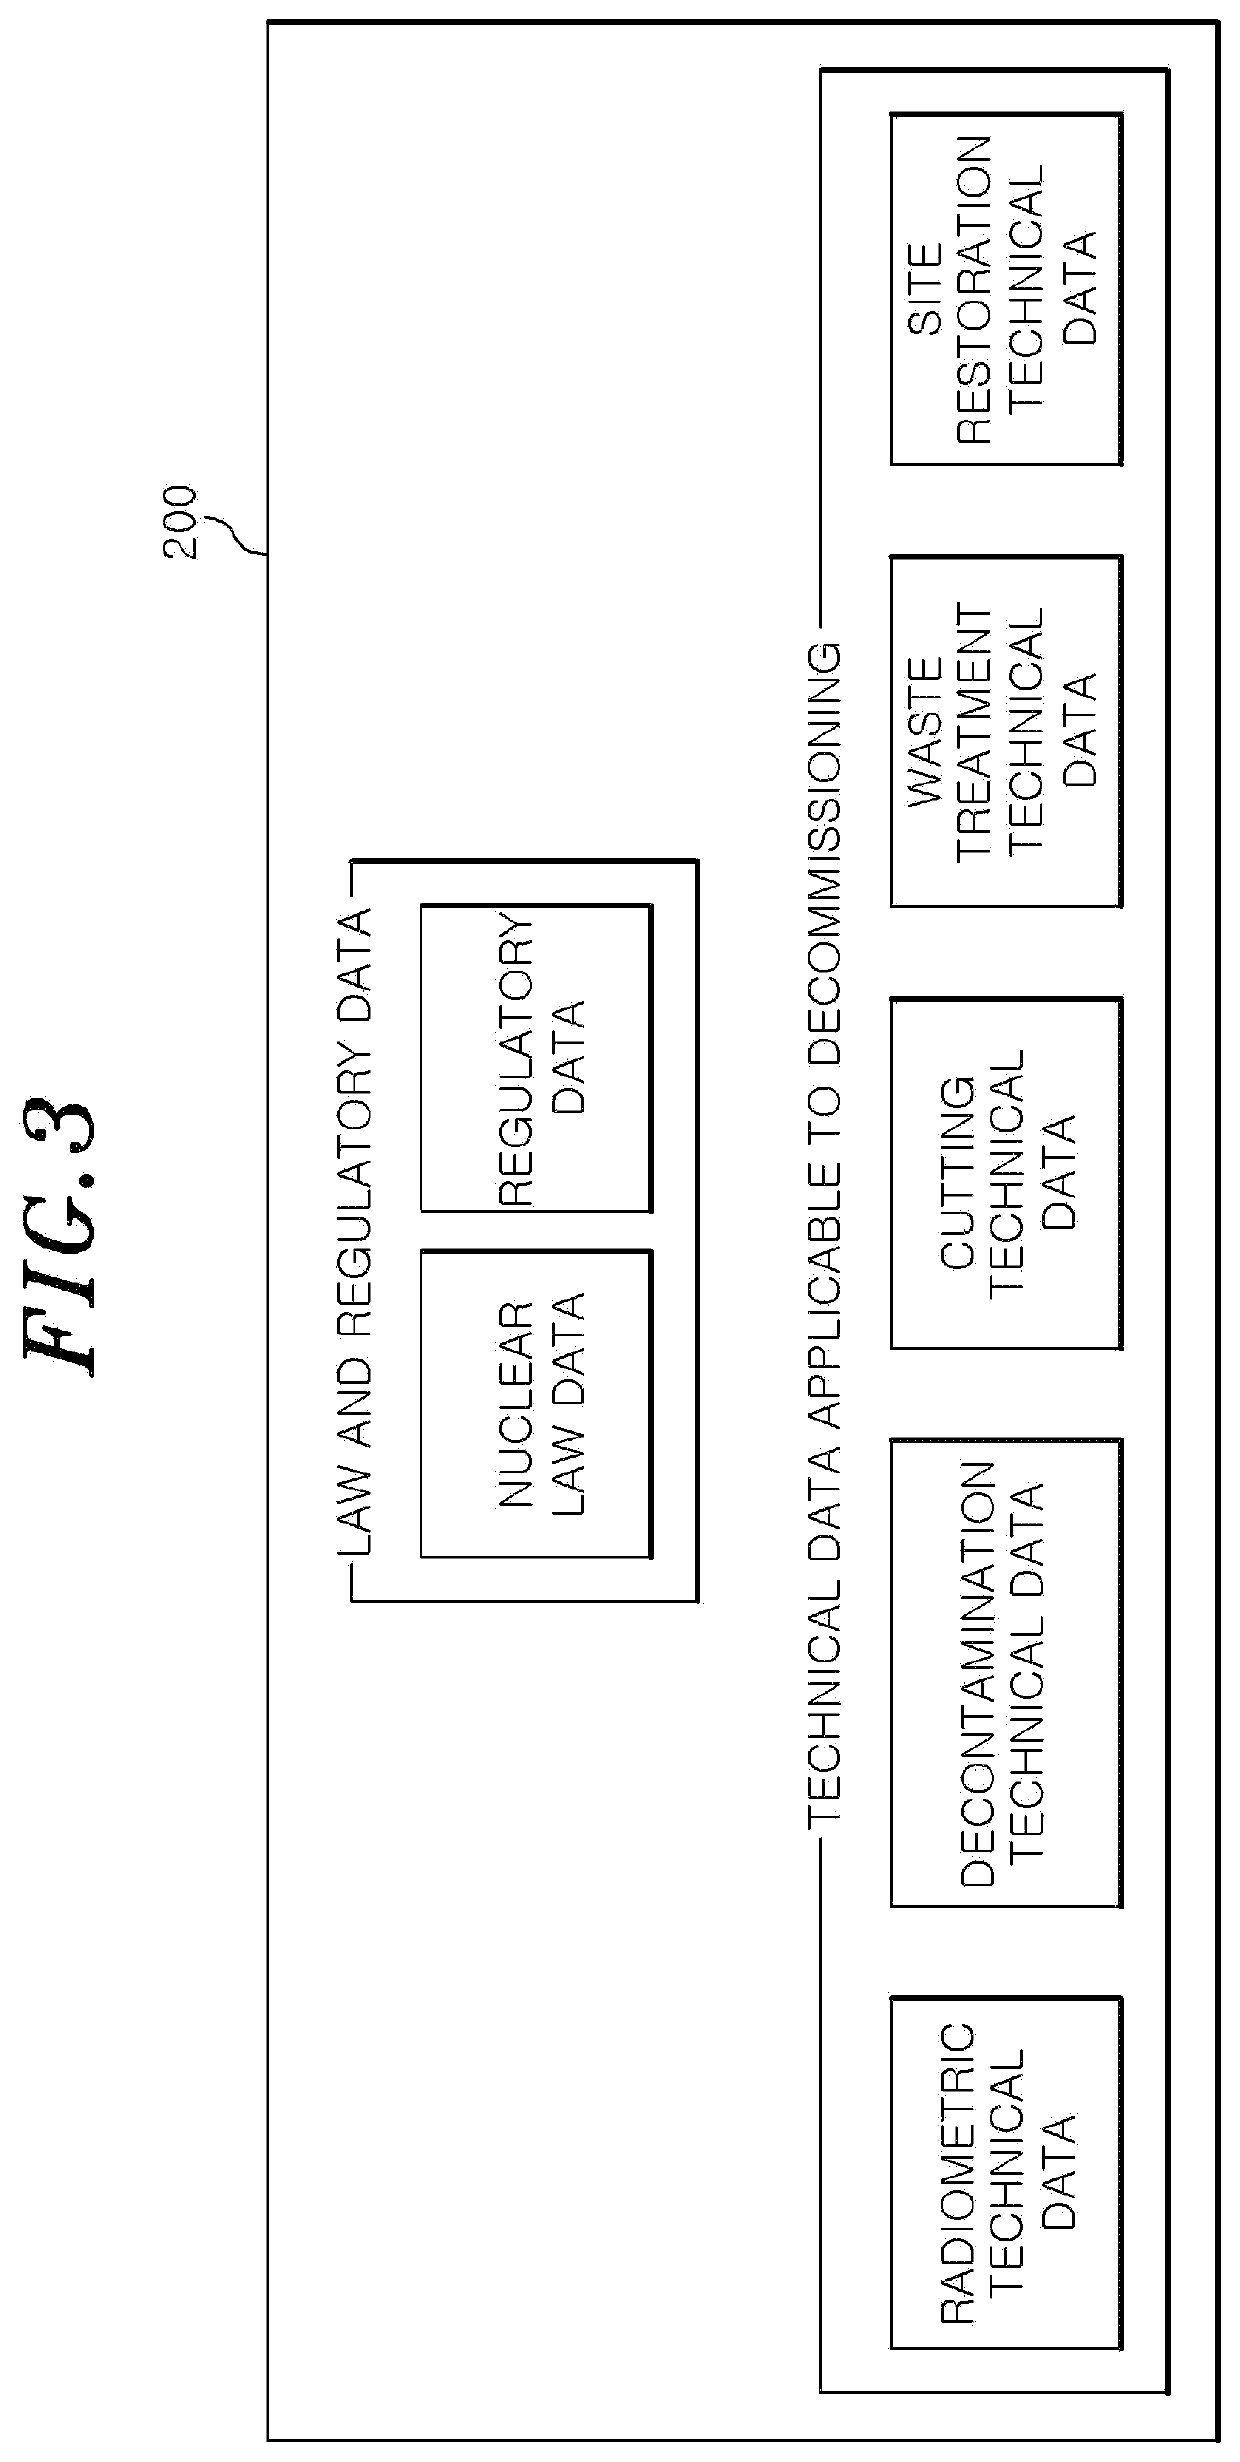 Method and apparatus for decommissioning plan of nuclear facility